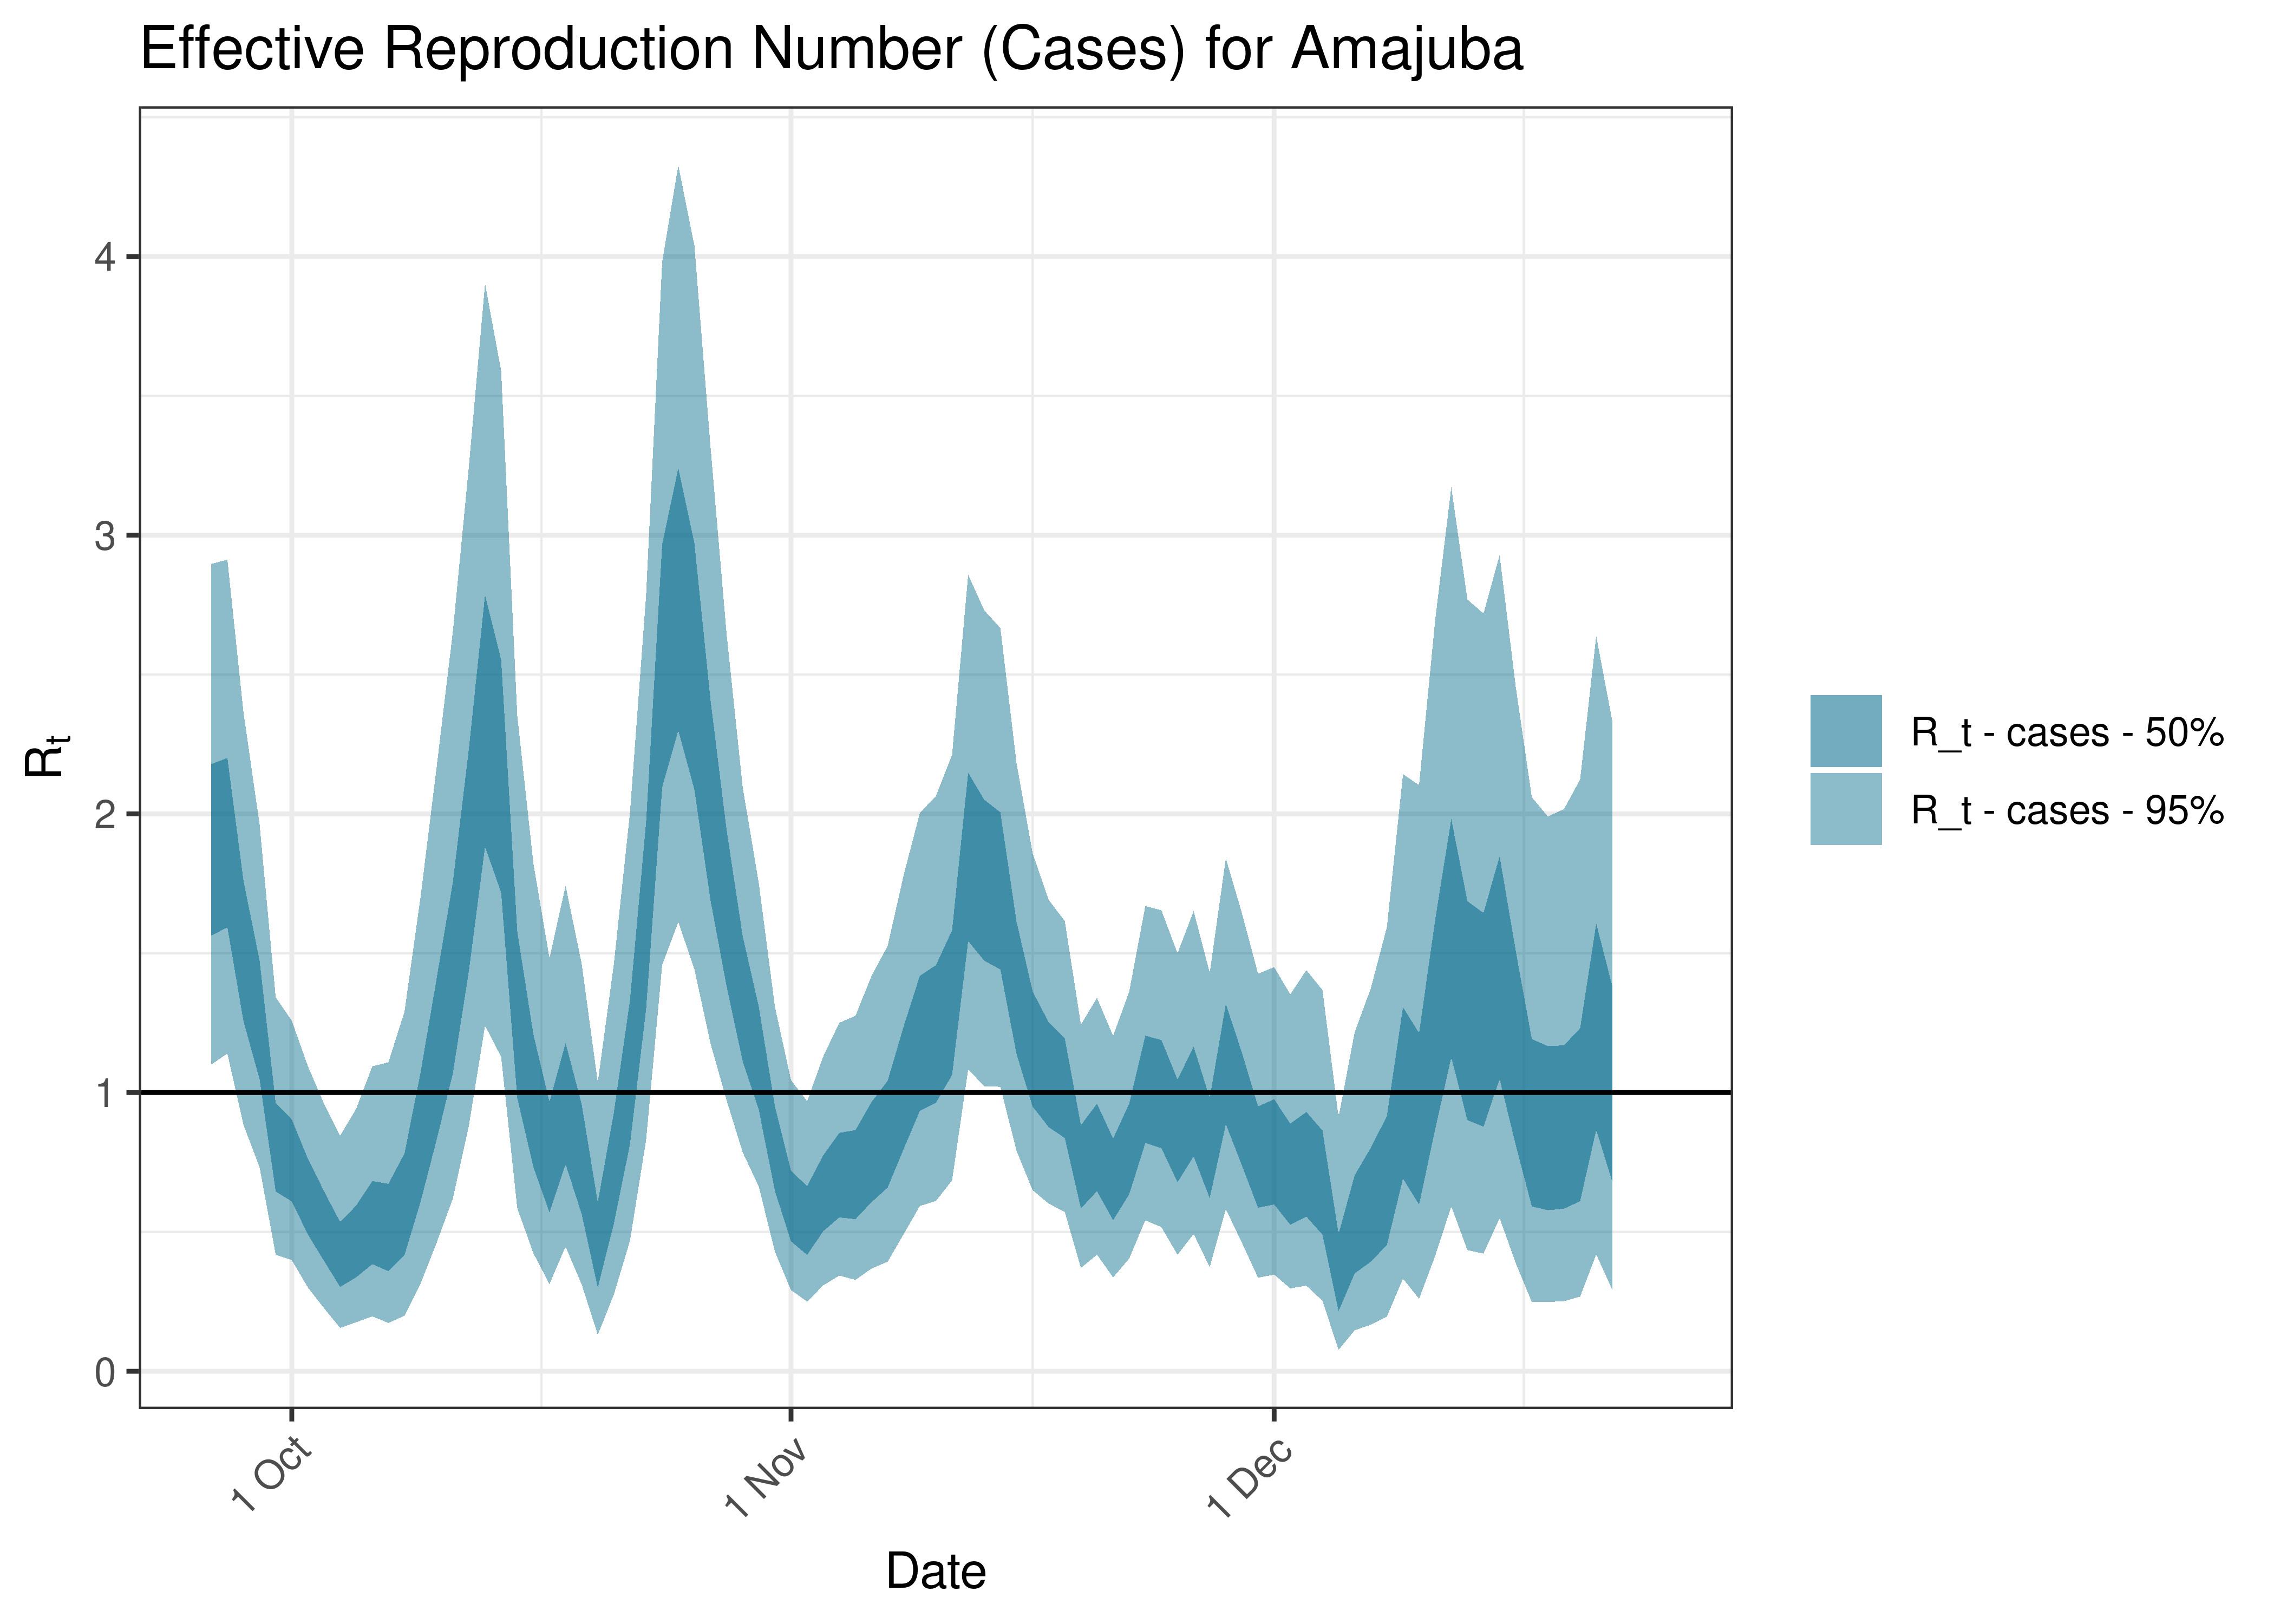 Estimated Effective Reproduction Number Based on Cases for Amajuba over last 90 days